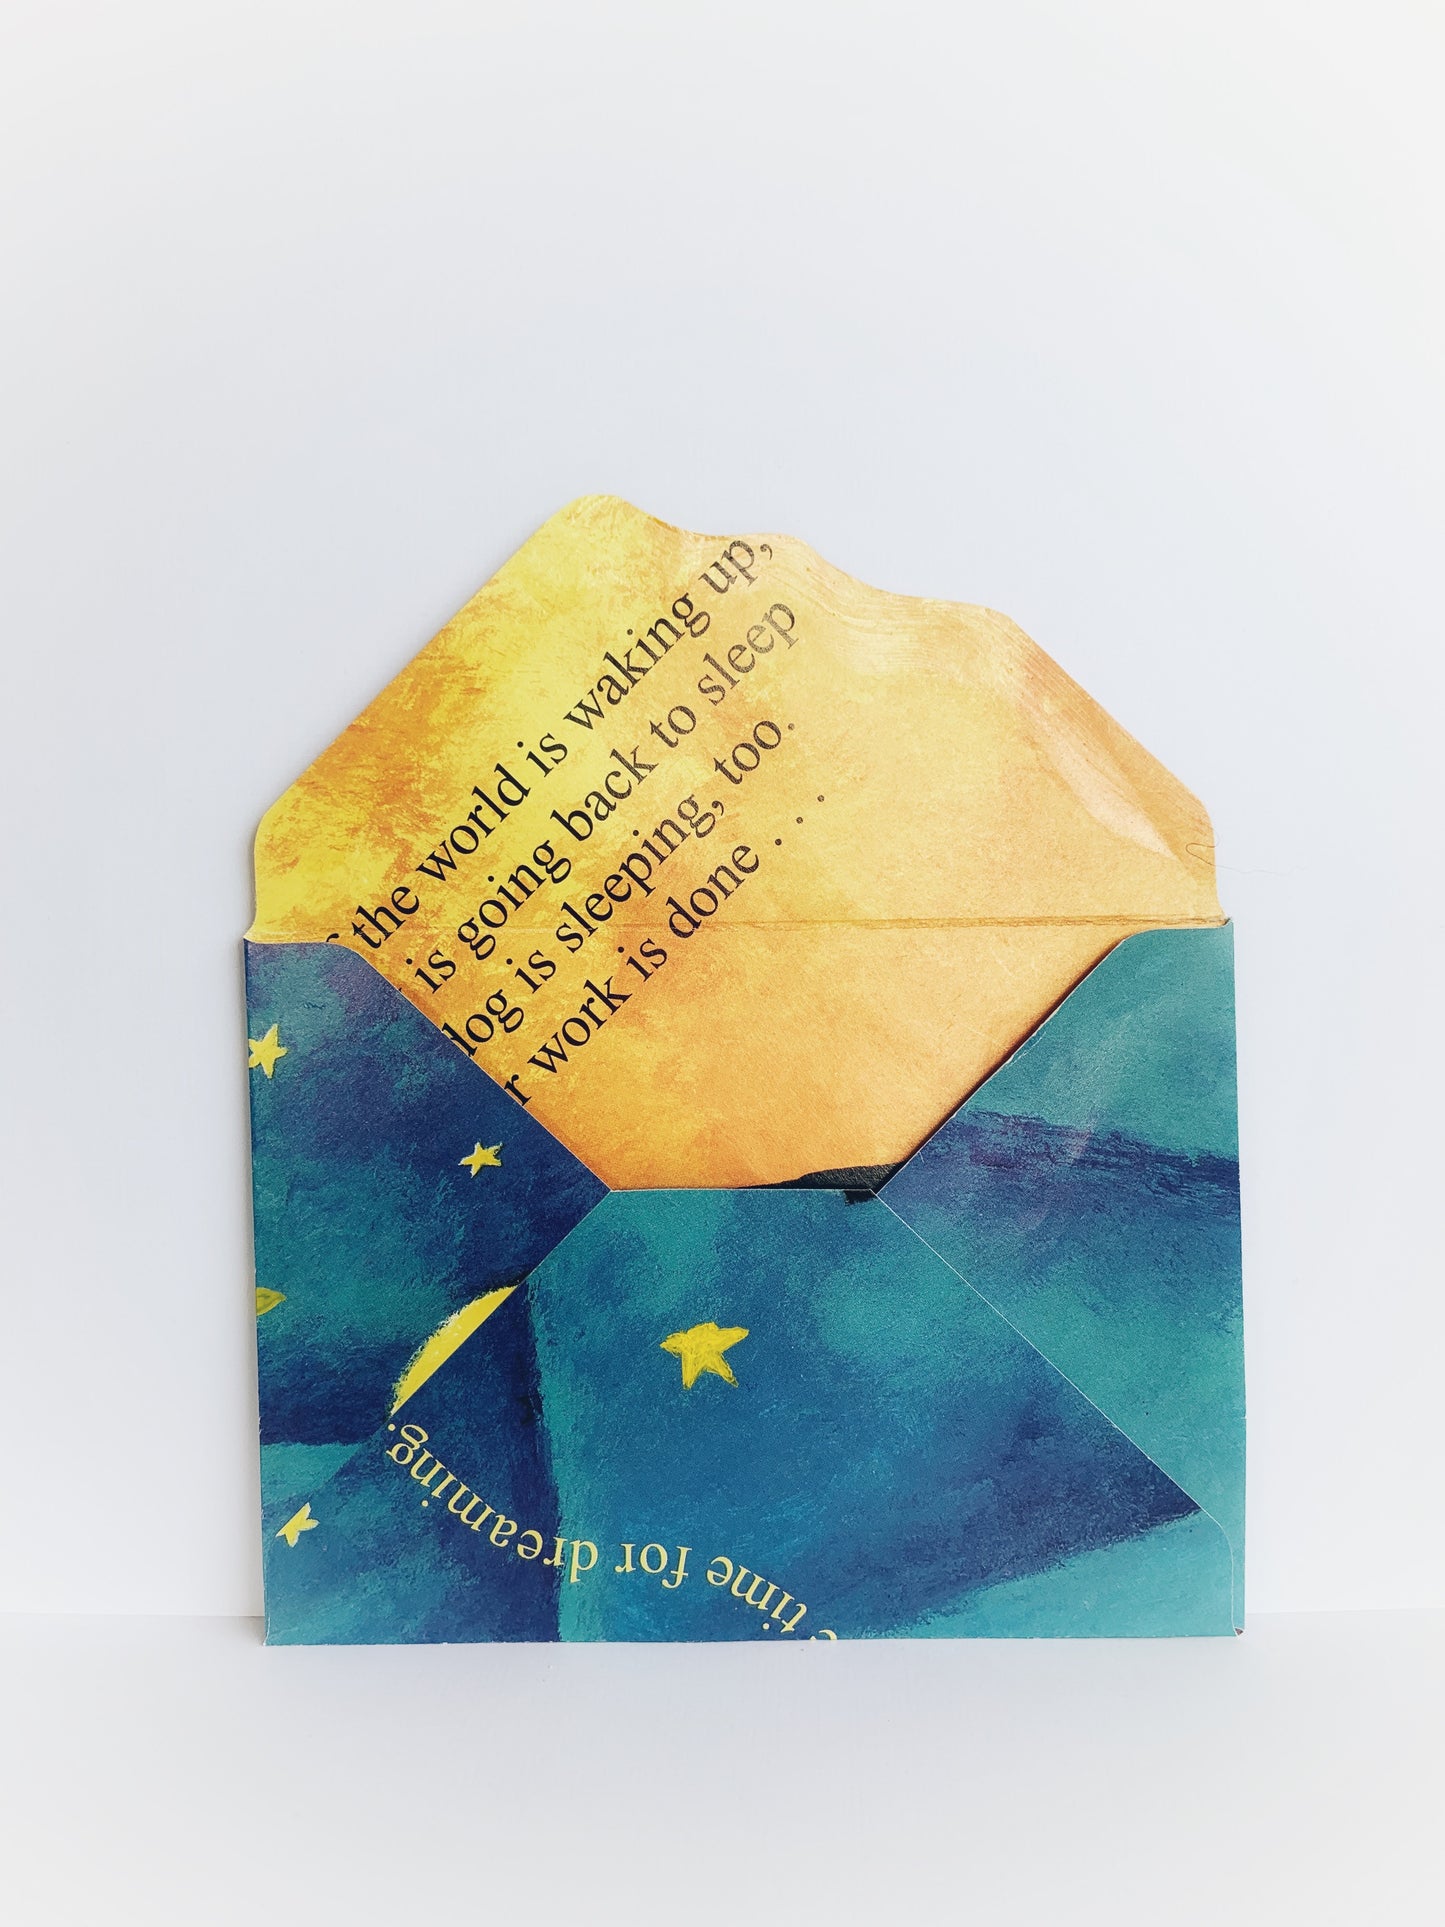 The back of an envelope with a star-filled sky